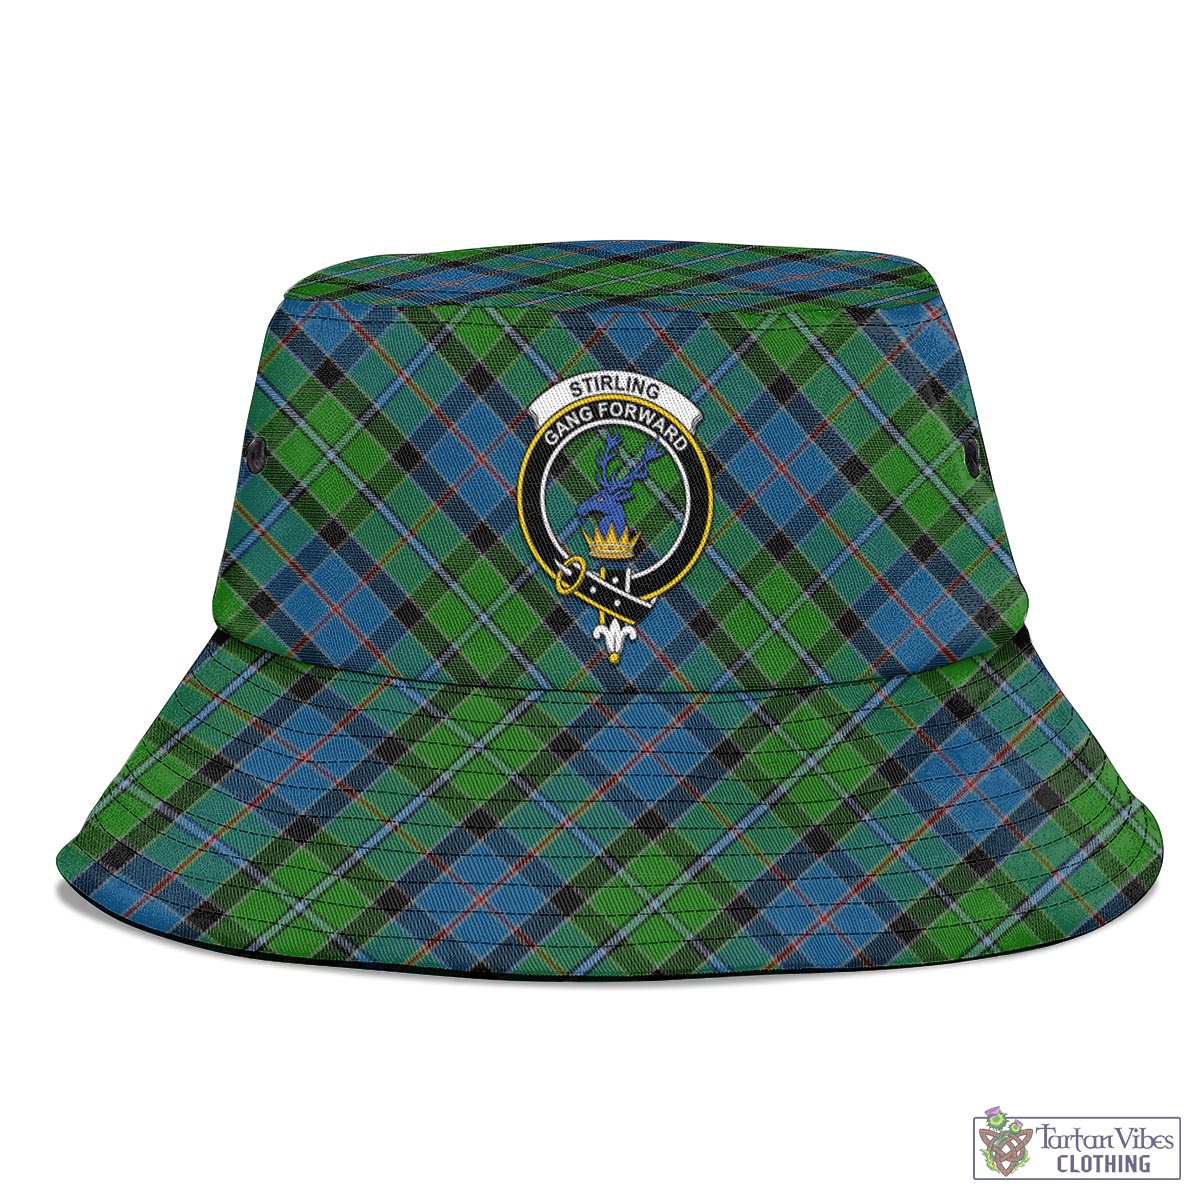 Tartan Vibes Clothing Stirling Tartan Bucket Hat with Family Crest